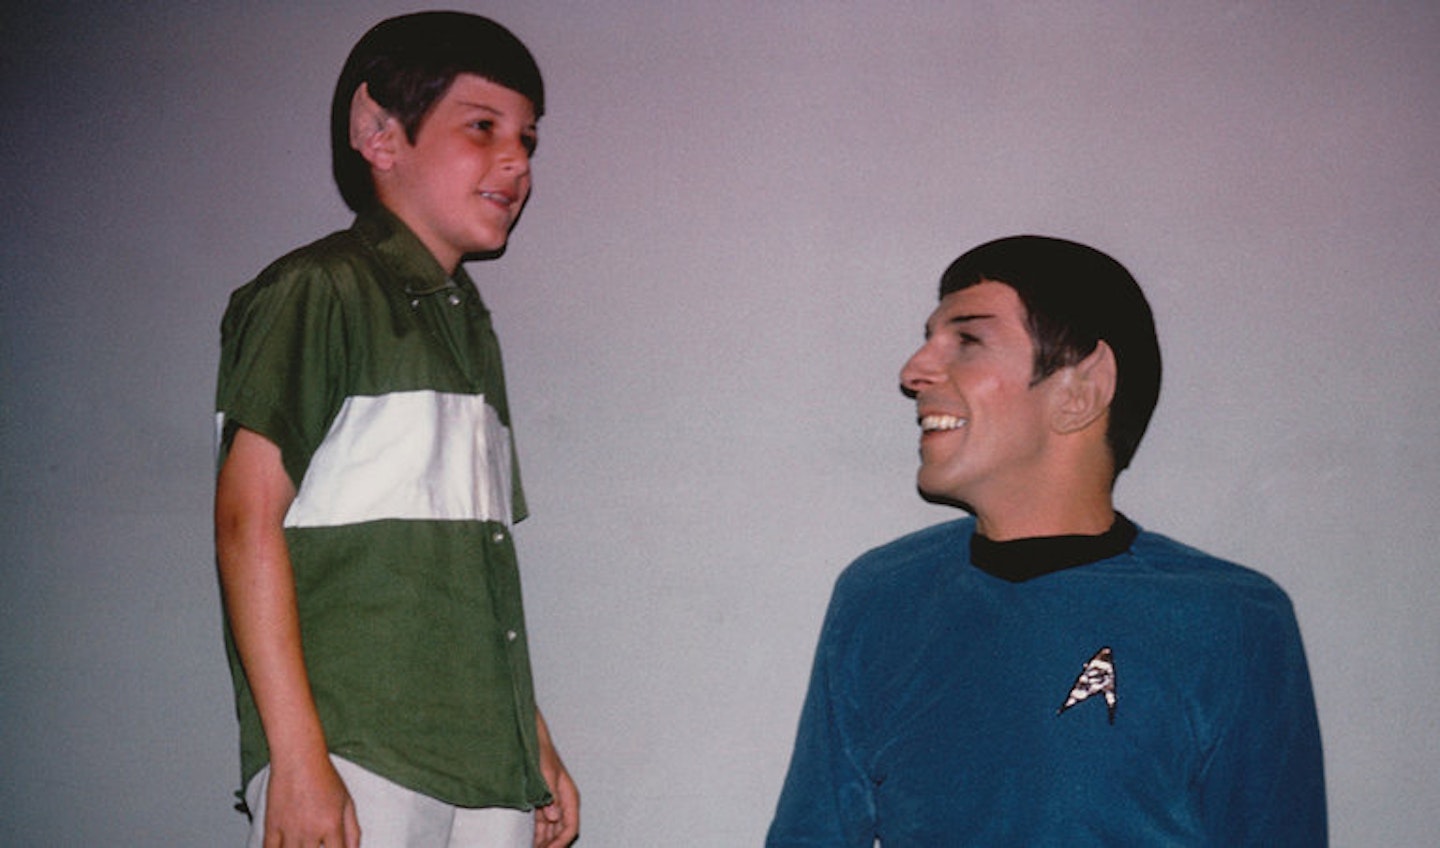 Main image from For The Love Of Spock